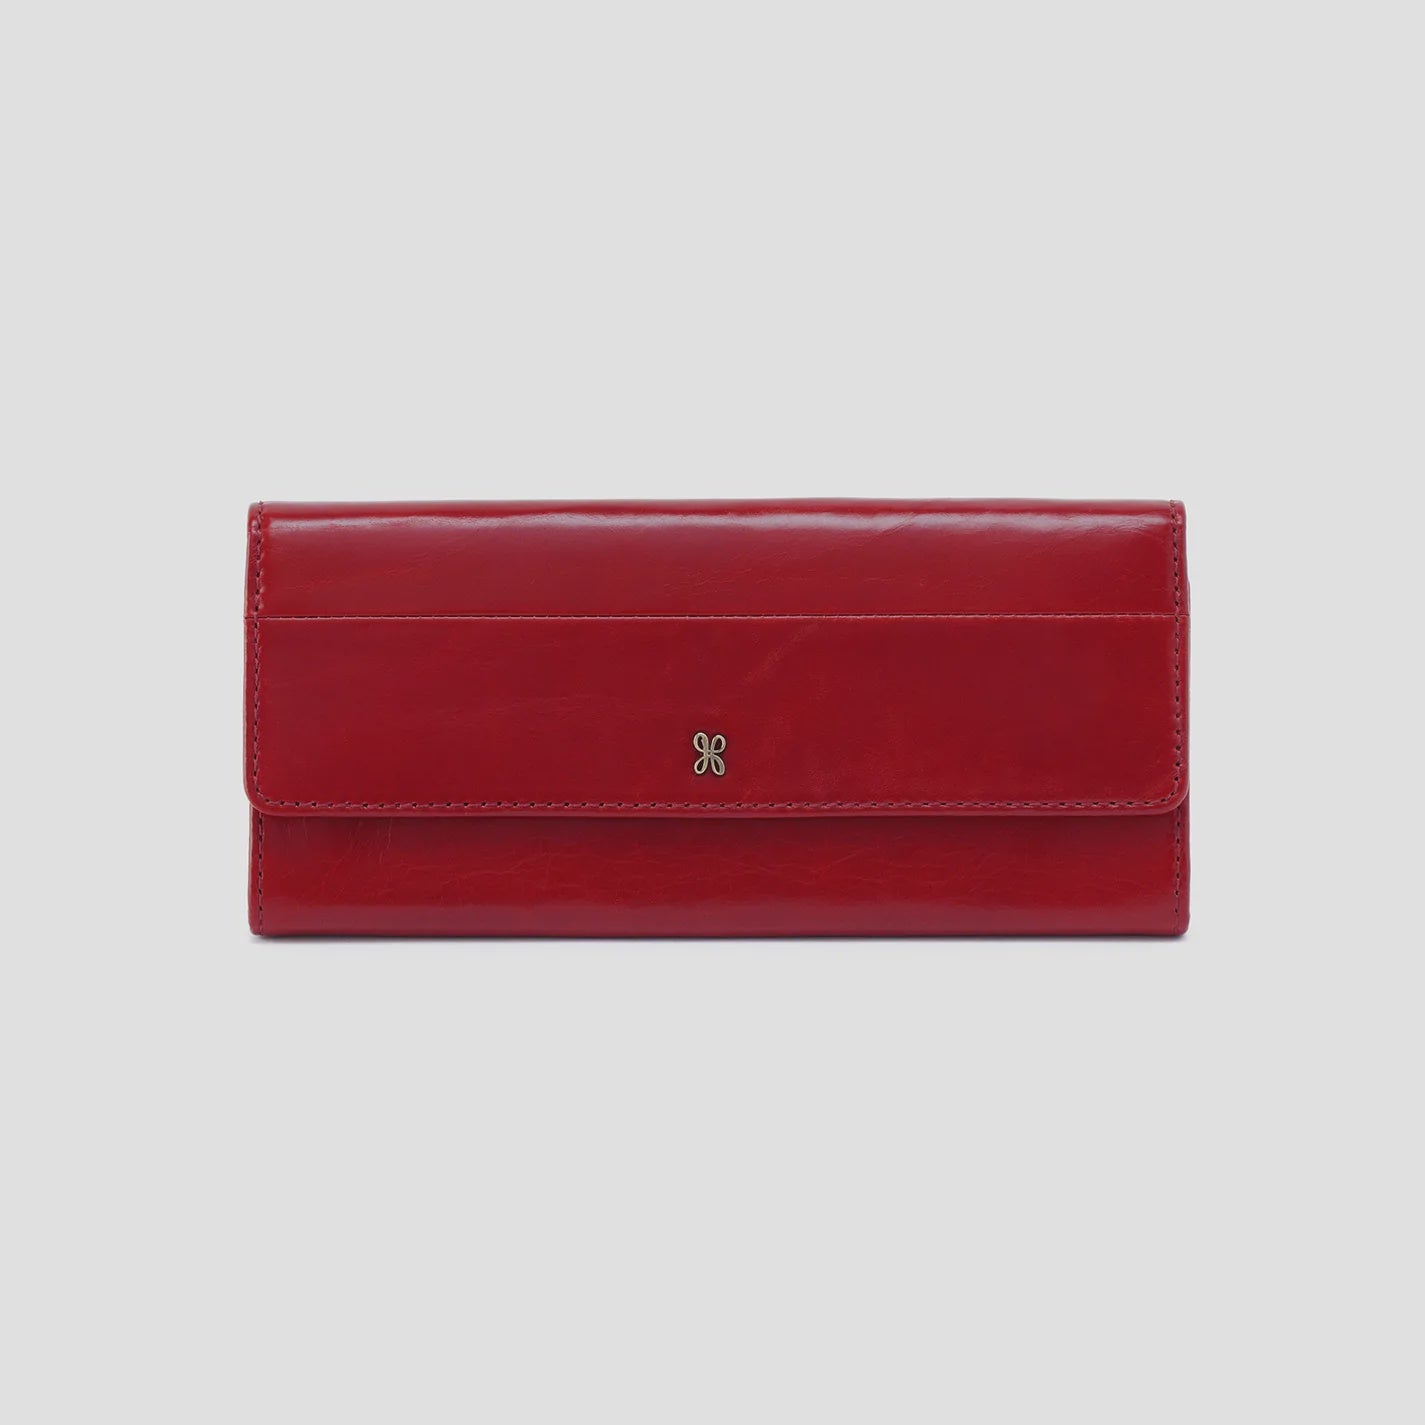 HOBO - JILL LARGE TRIFOLD WALLET IN CRIMSON POLISHED LEATHER